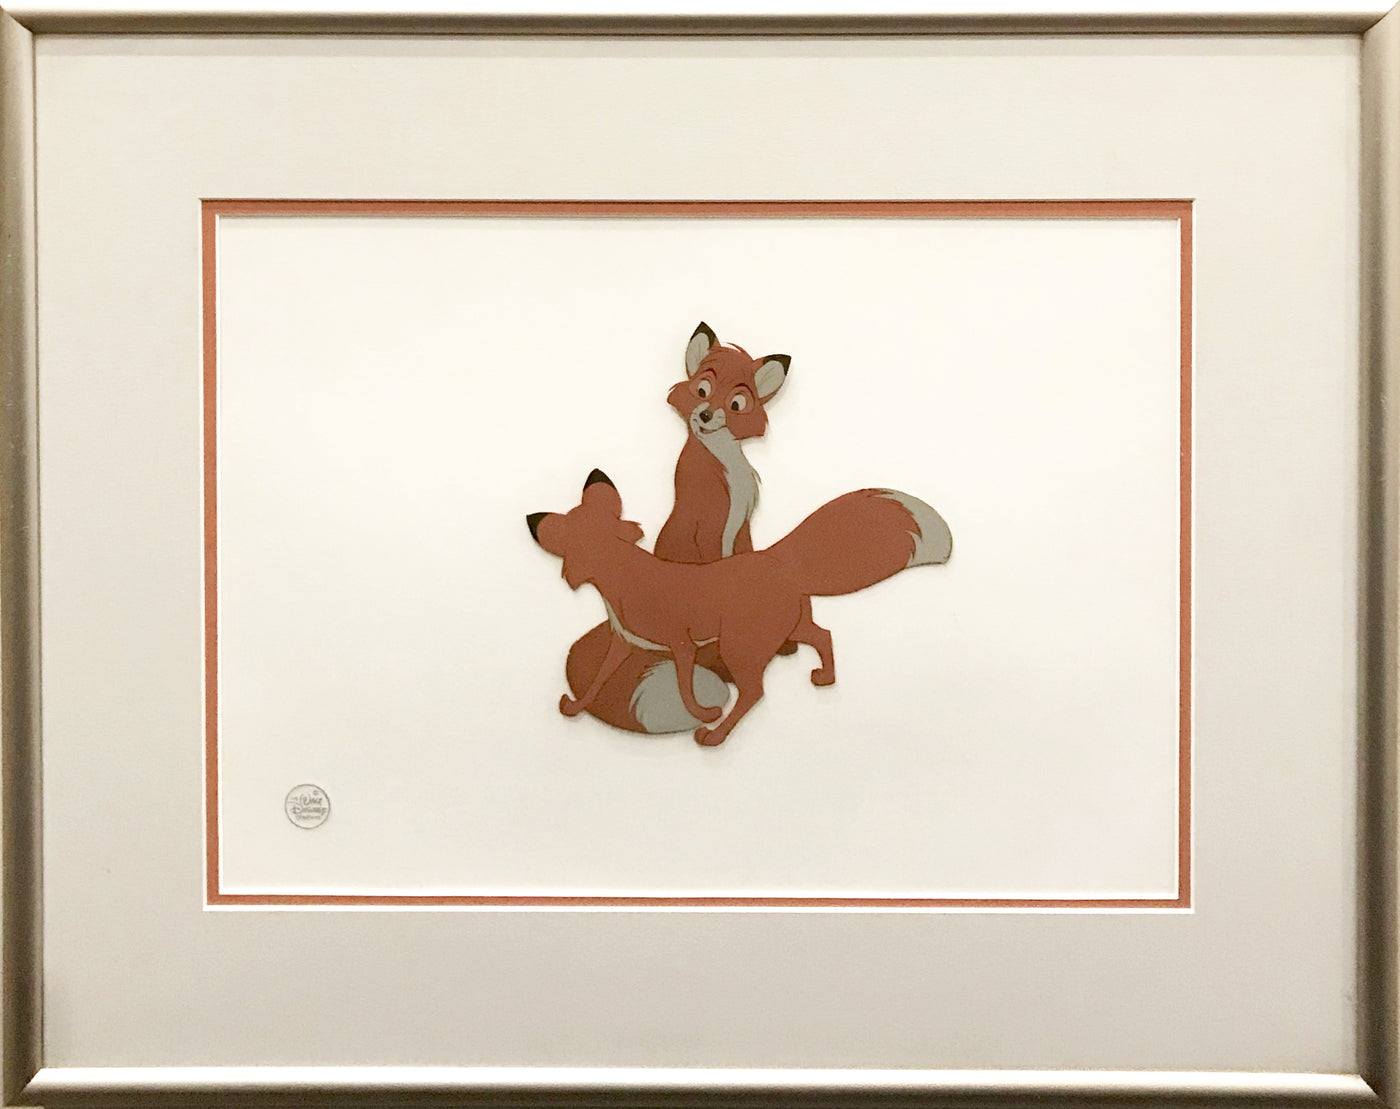 Original Walt Disney Production Cel from The Fox and the Hound featuring Tod and Vixey